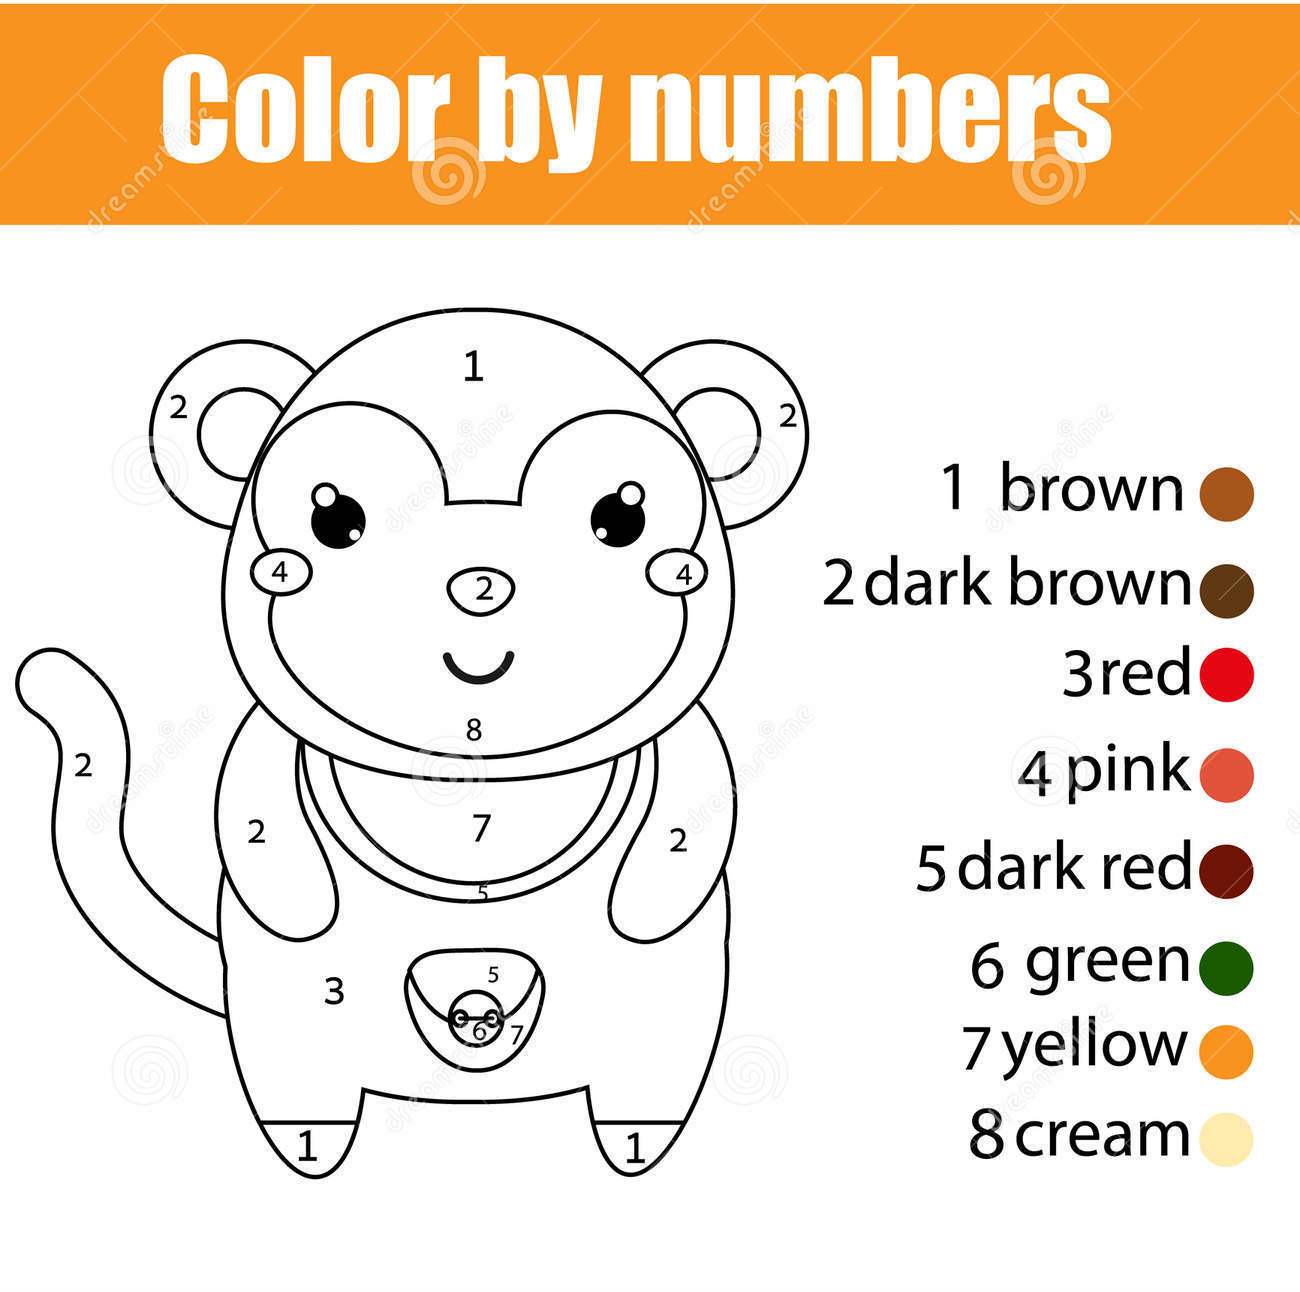 coloring-page-monkey-color-numbers-educational-children-game-drawing-kids-activity-printable-sheet-animals-theme-97605060.jpg